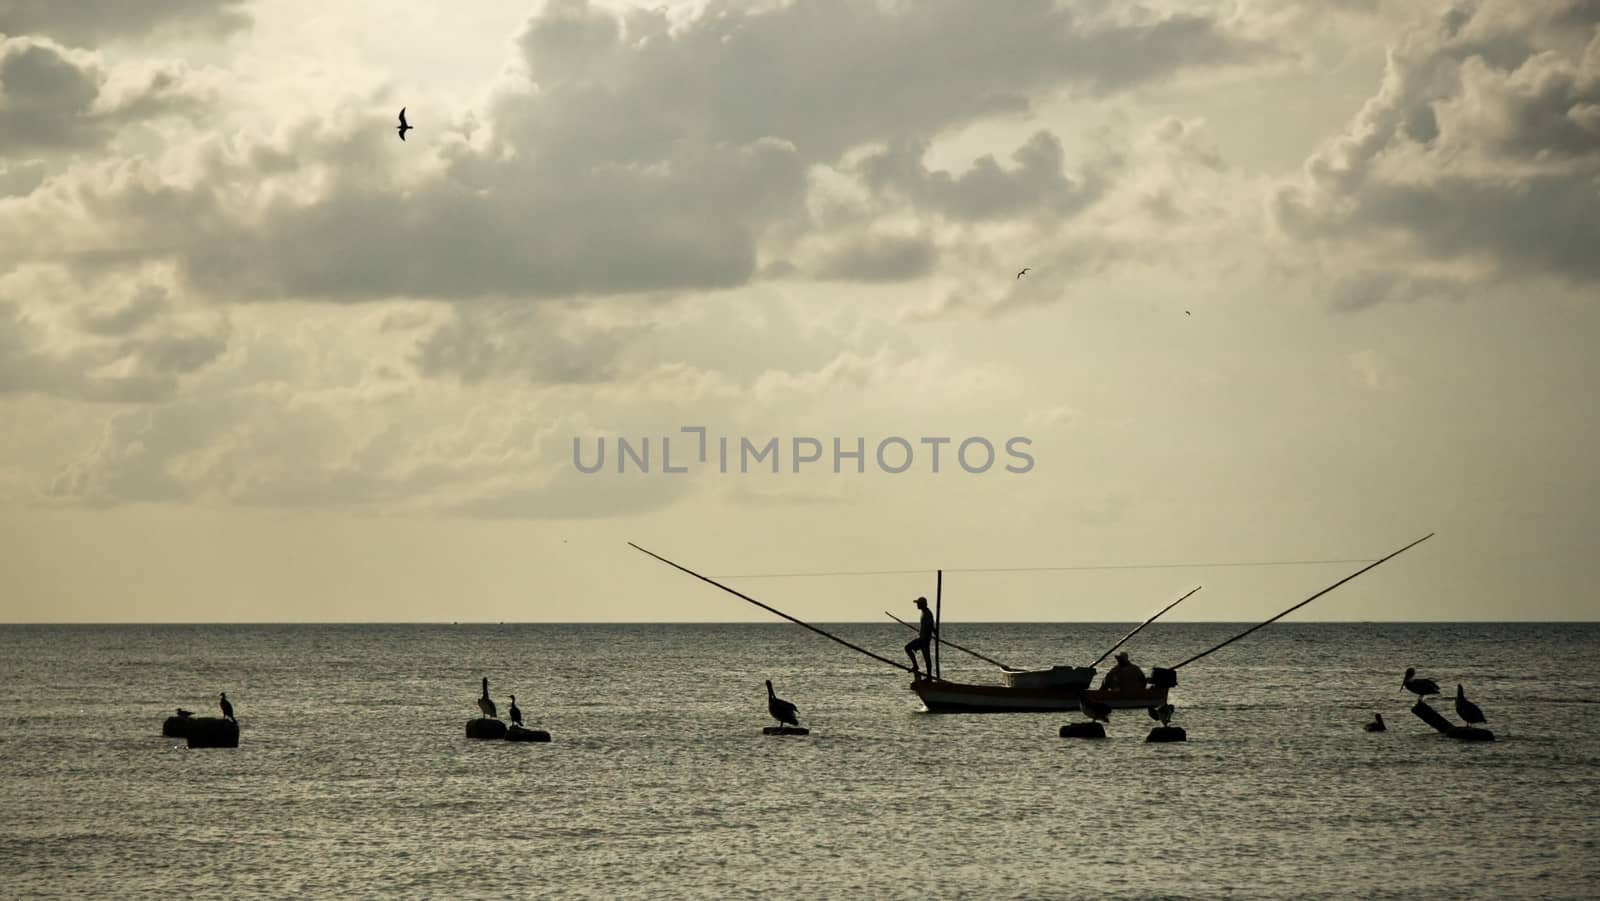 Silhouettes of fisherman on small fishing boat, with neotropic c by Ivanko